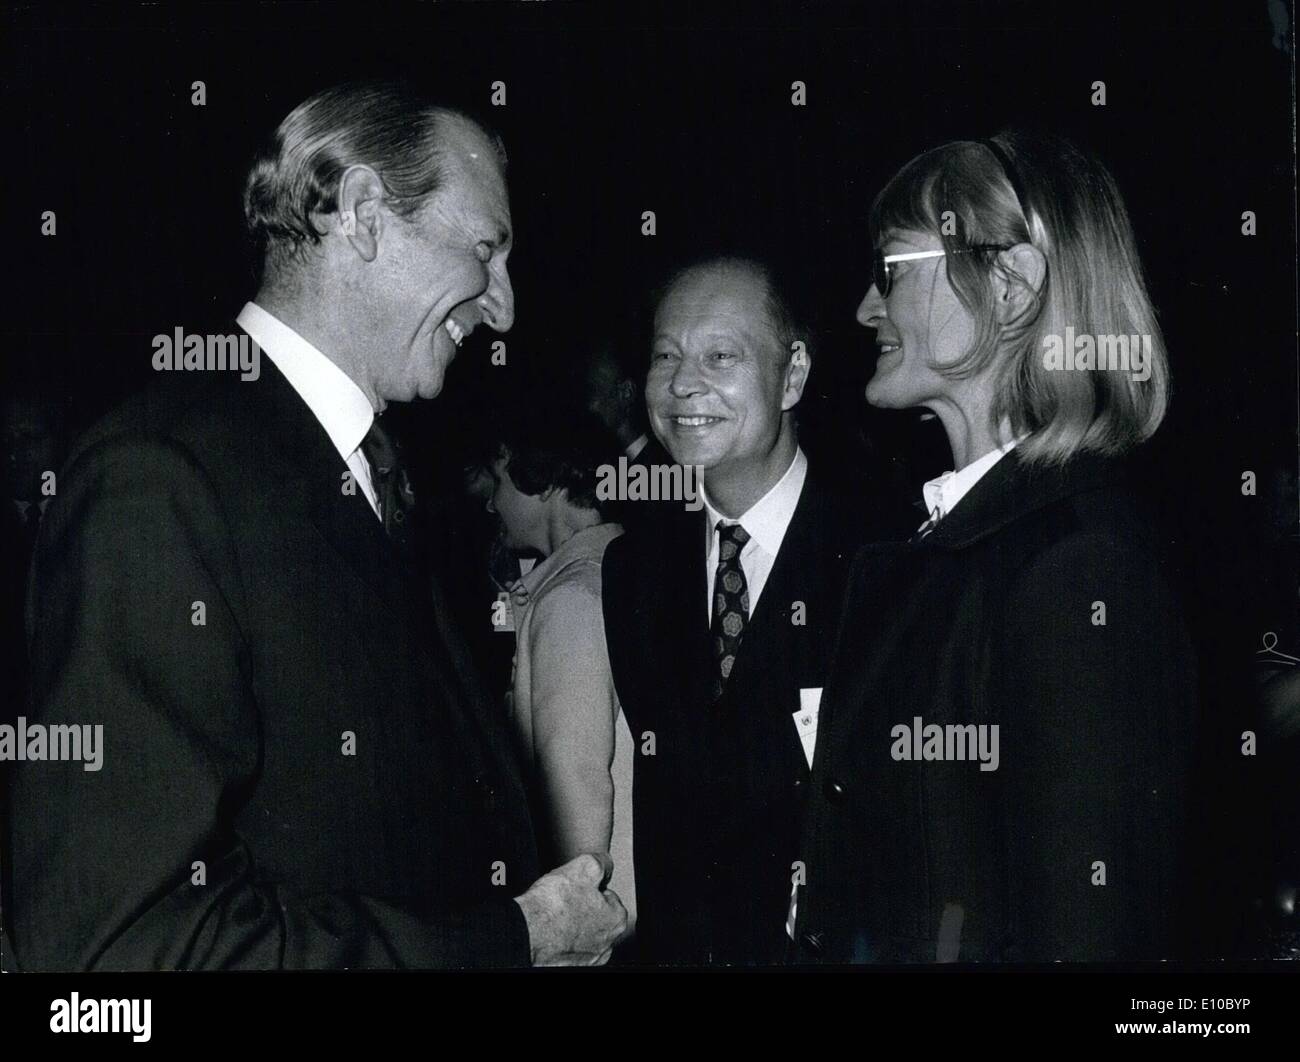 Jun. 06, 1972 - Un-Cofence on human environment: Monday night, UN and a party at Nordiska museet in Stockholm. General Secretary Kurt Waldhelm talks to the foreign miinister of Sweden, Krister Wickman. Stock Photo